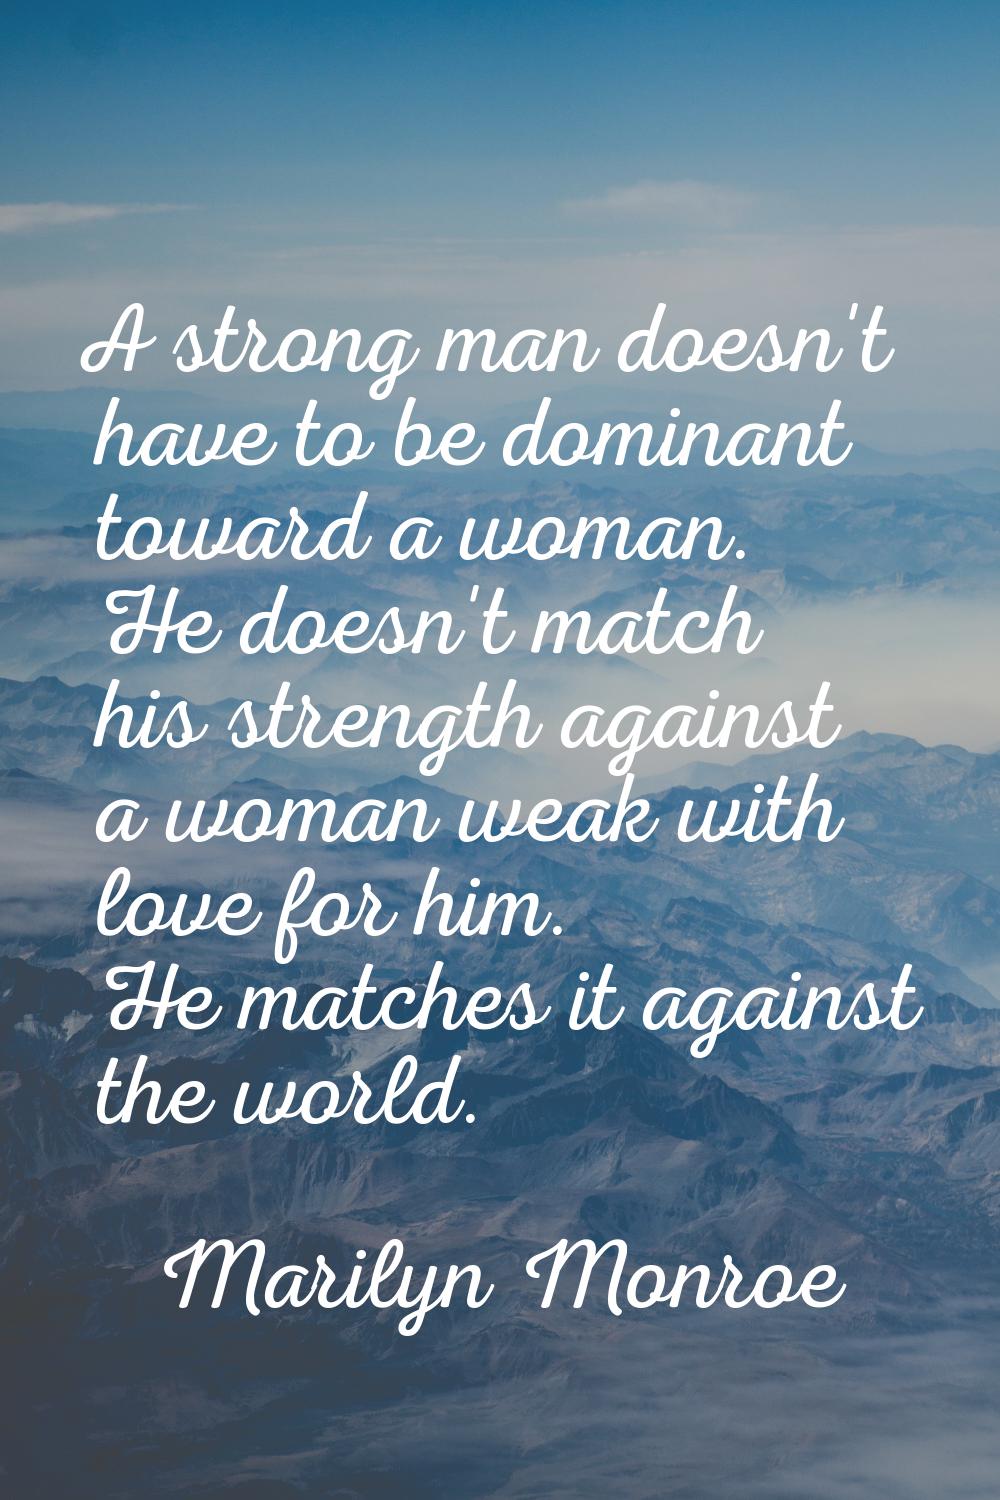 A strong man doesn't have to be dominant toward a woman. He doesn't match his strength against a wo